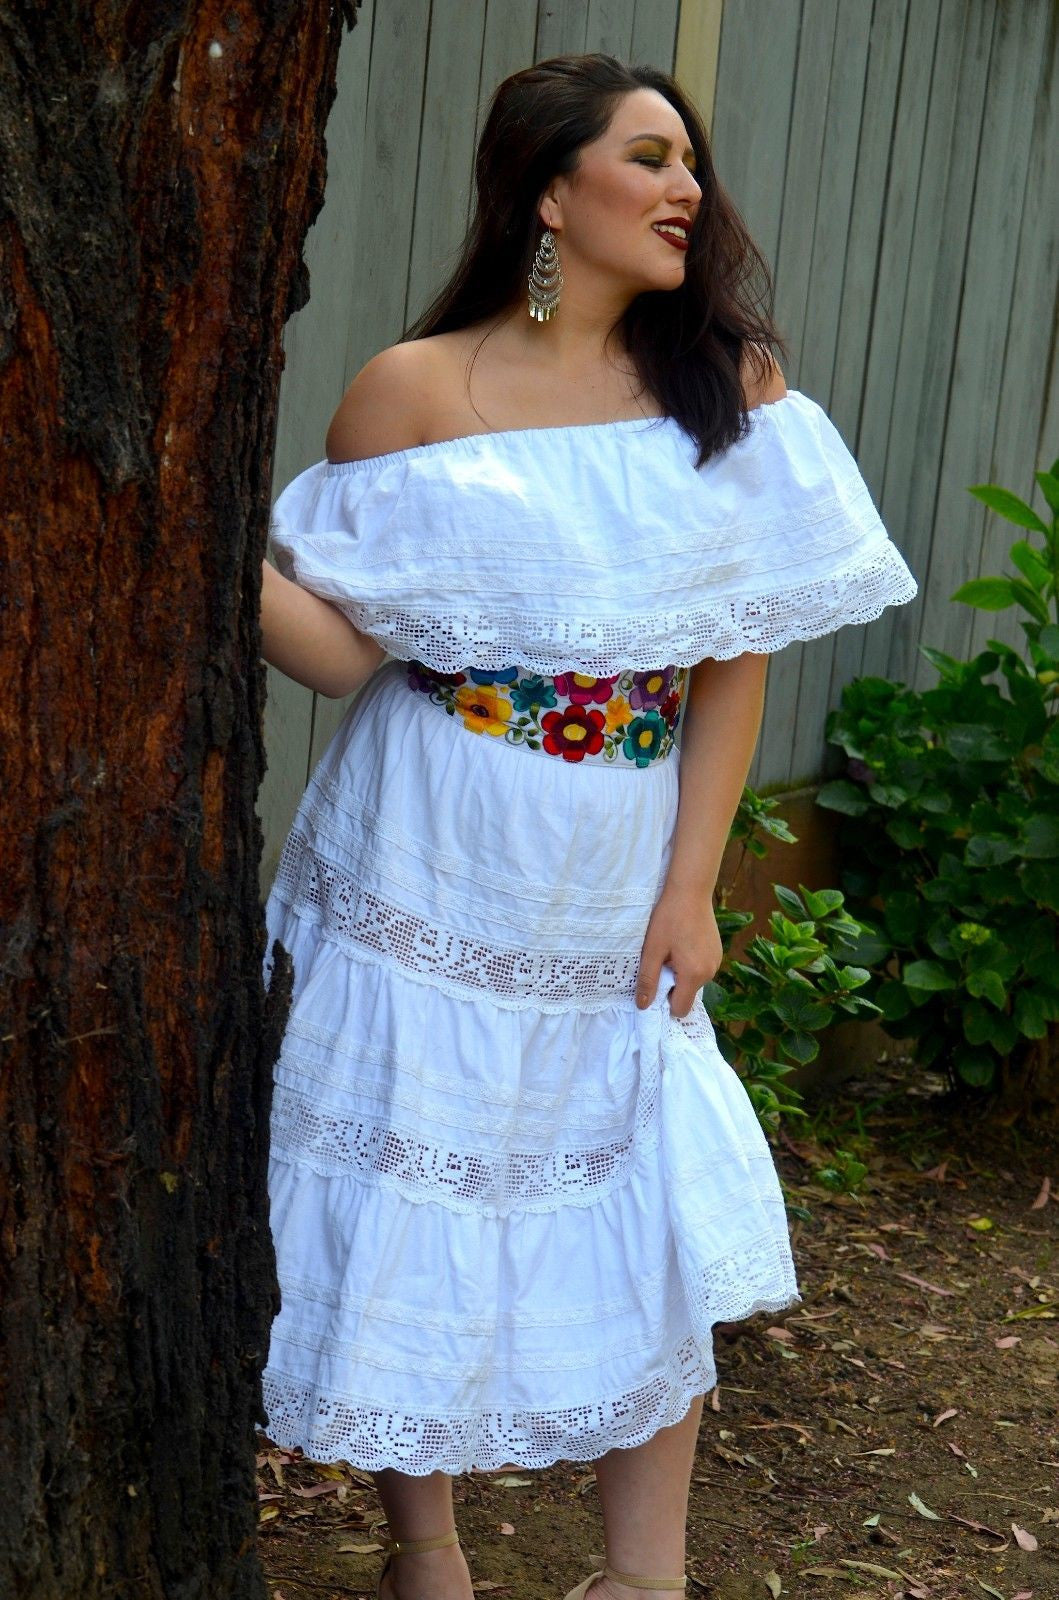 white off the shoulder mexican dress